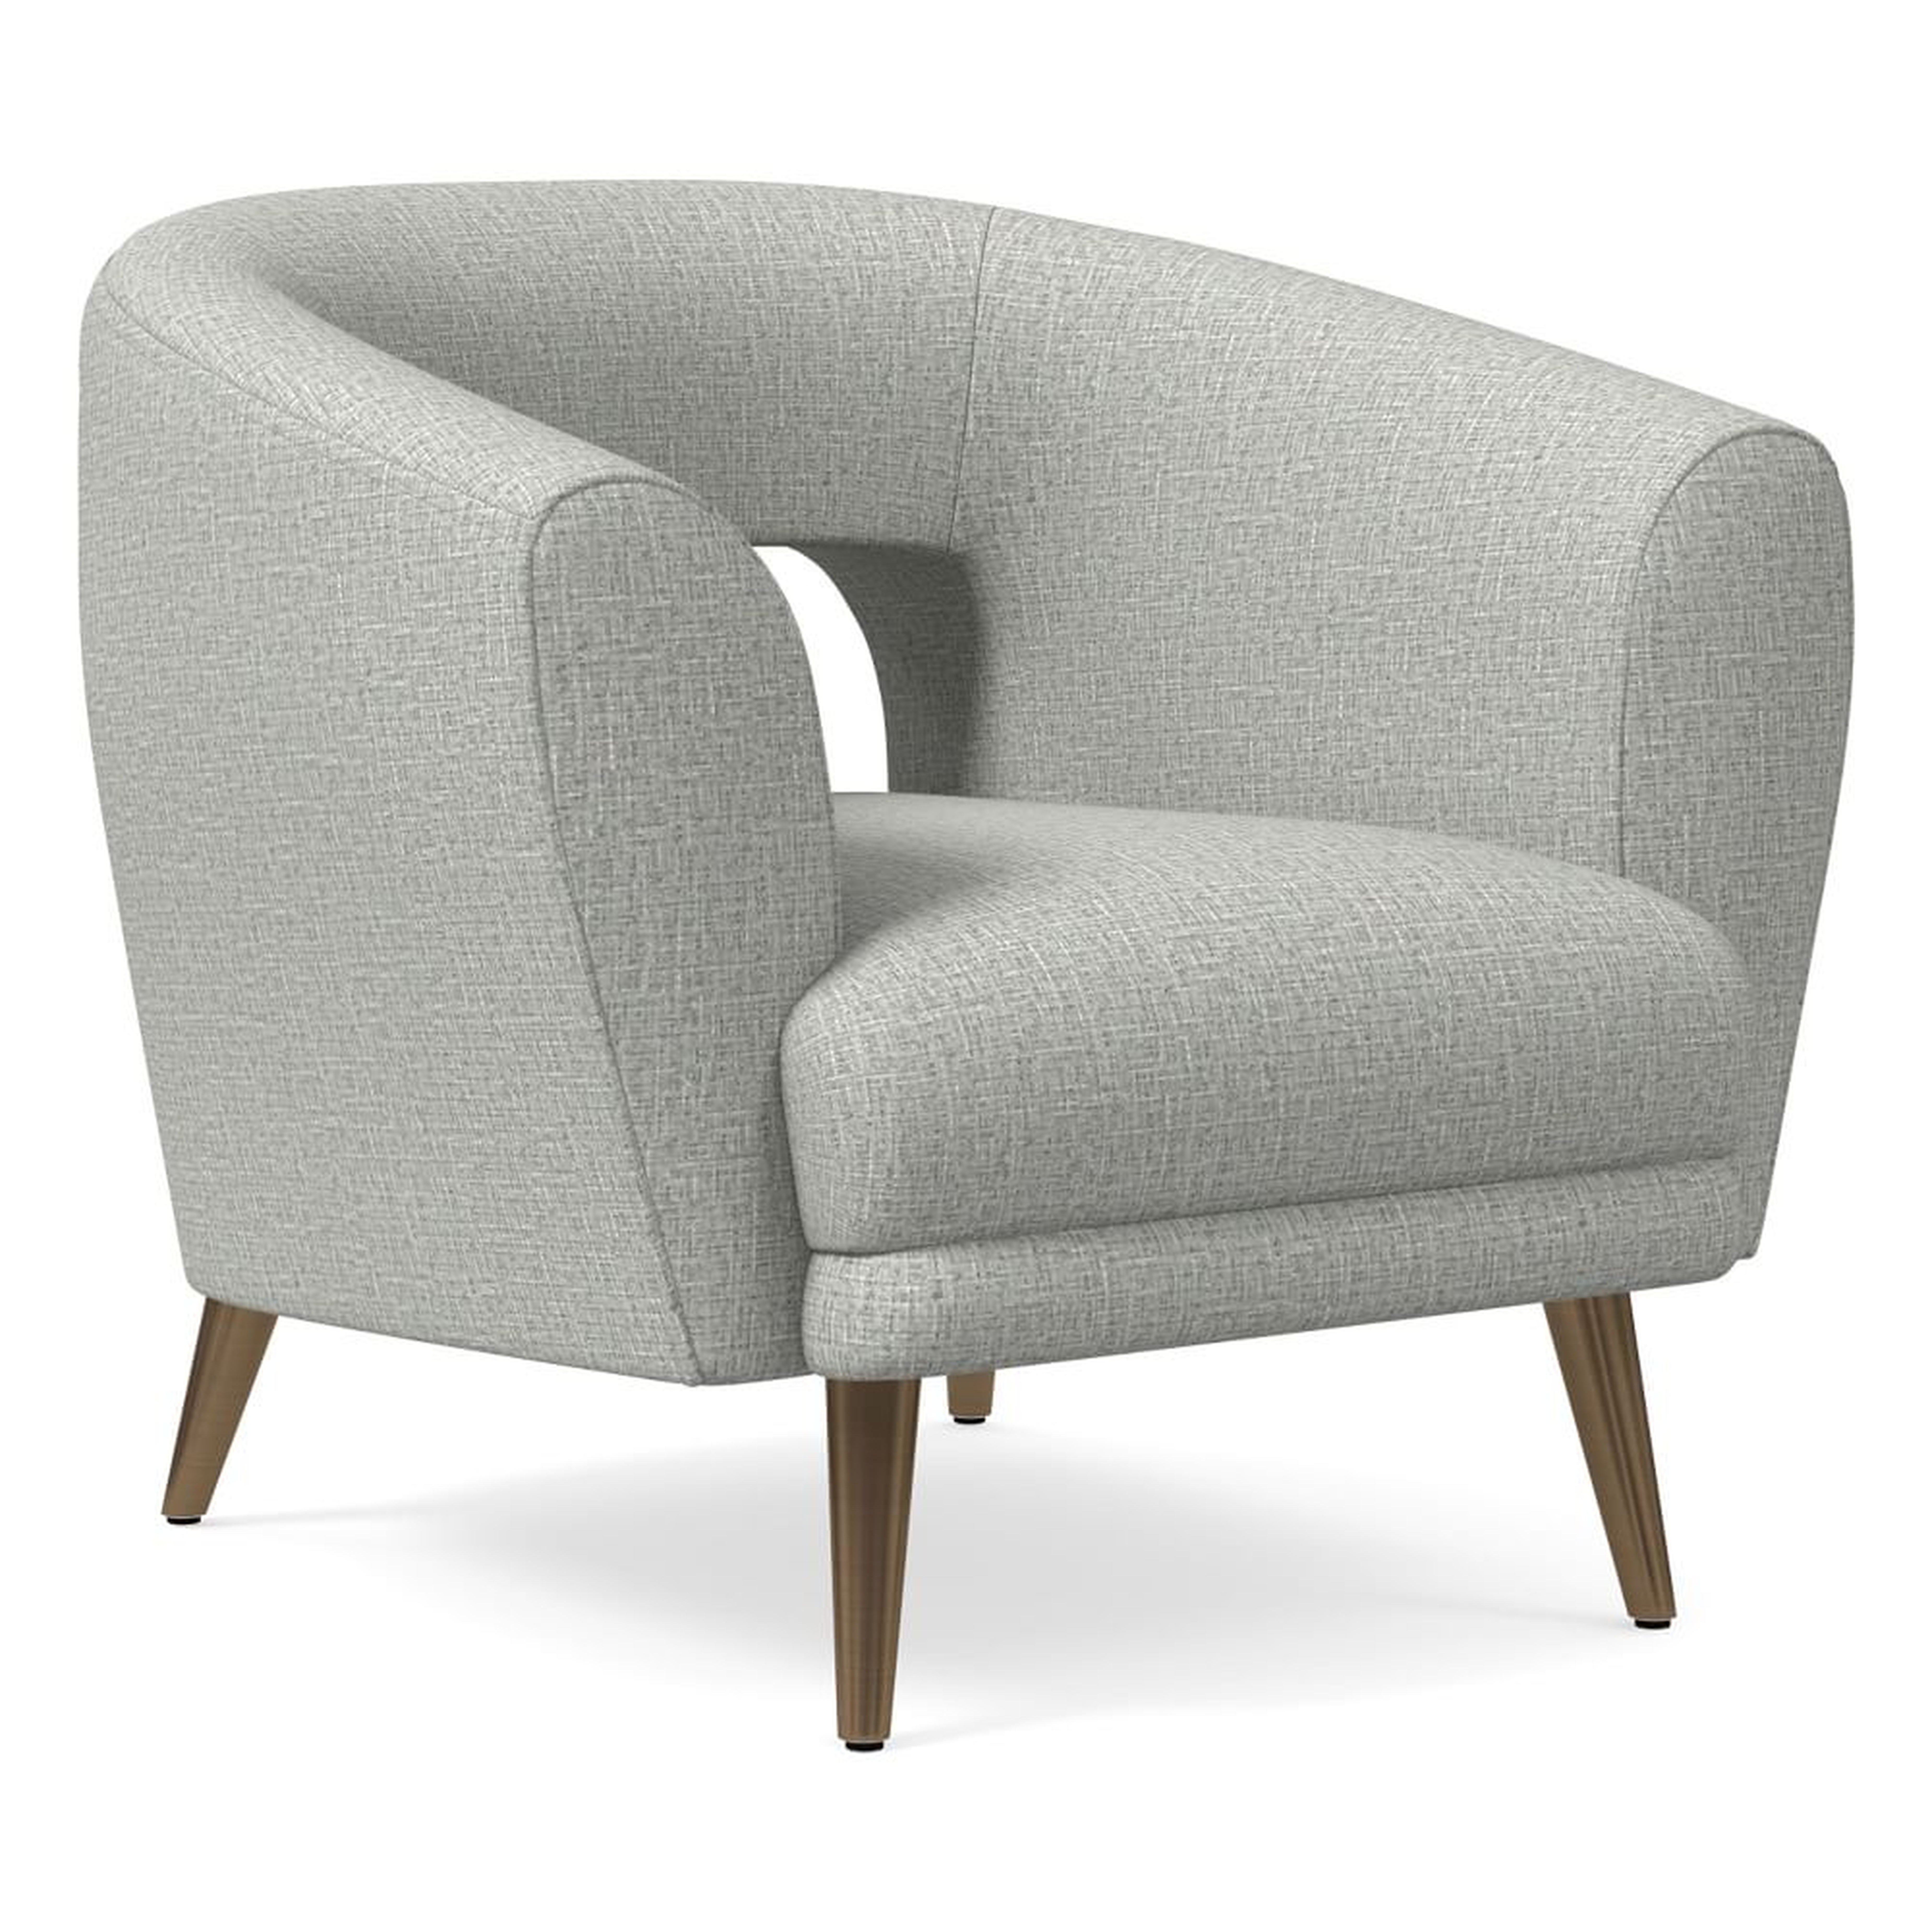 Millie Chair, Poly, Deco Weave, Pearl Gray, Oil Rubbed Bronze - West Elm